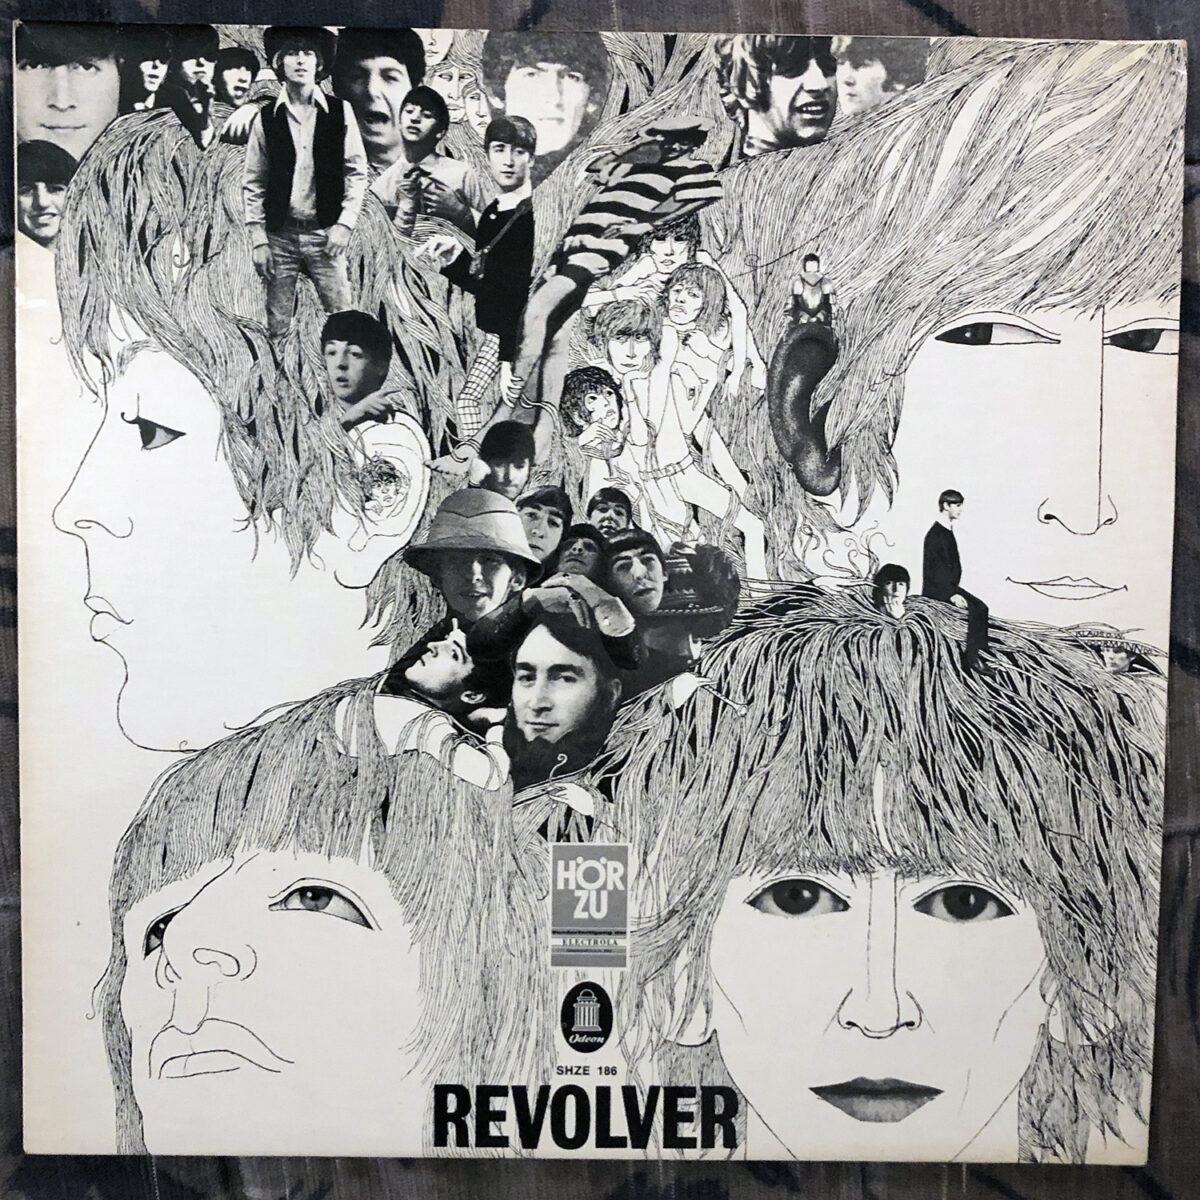 Album of the day "Revolver" by The Beatles. 